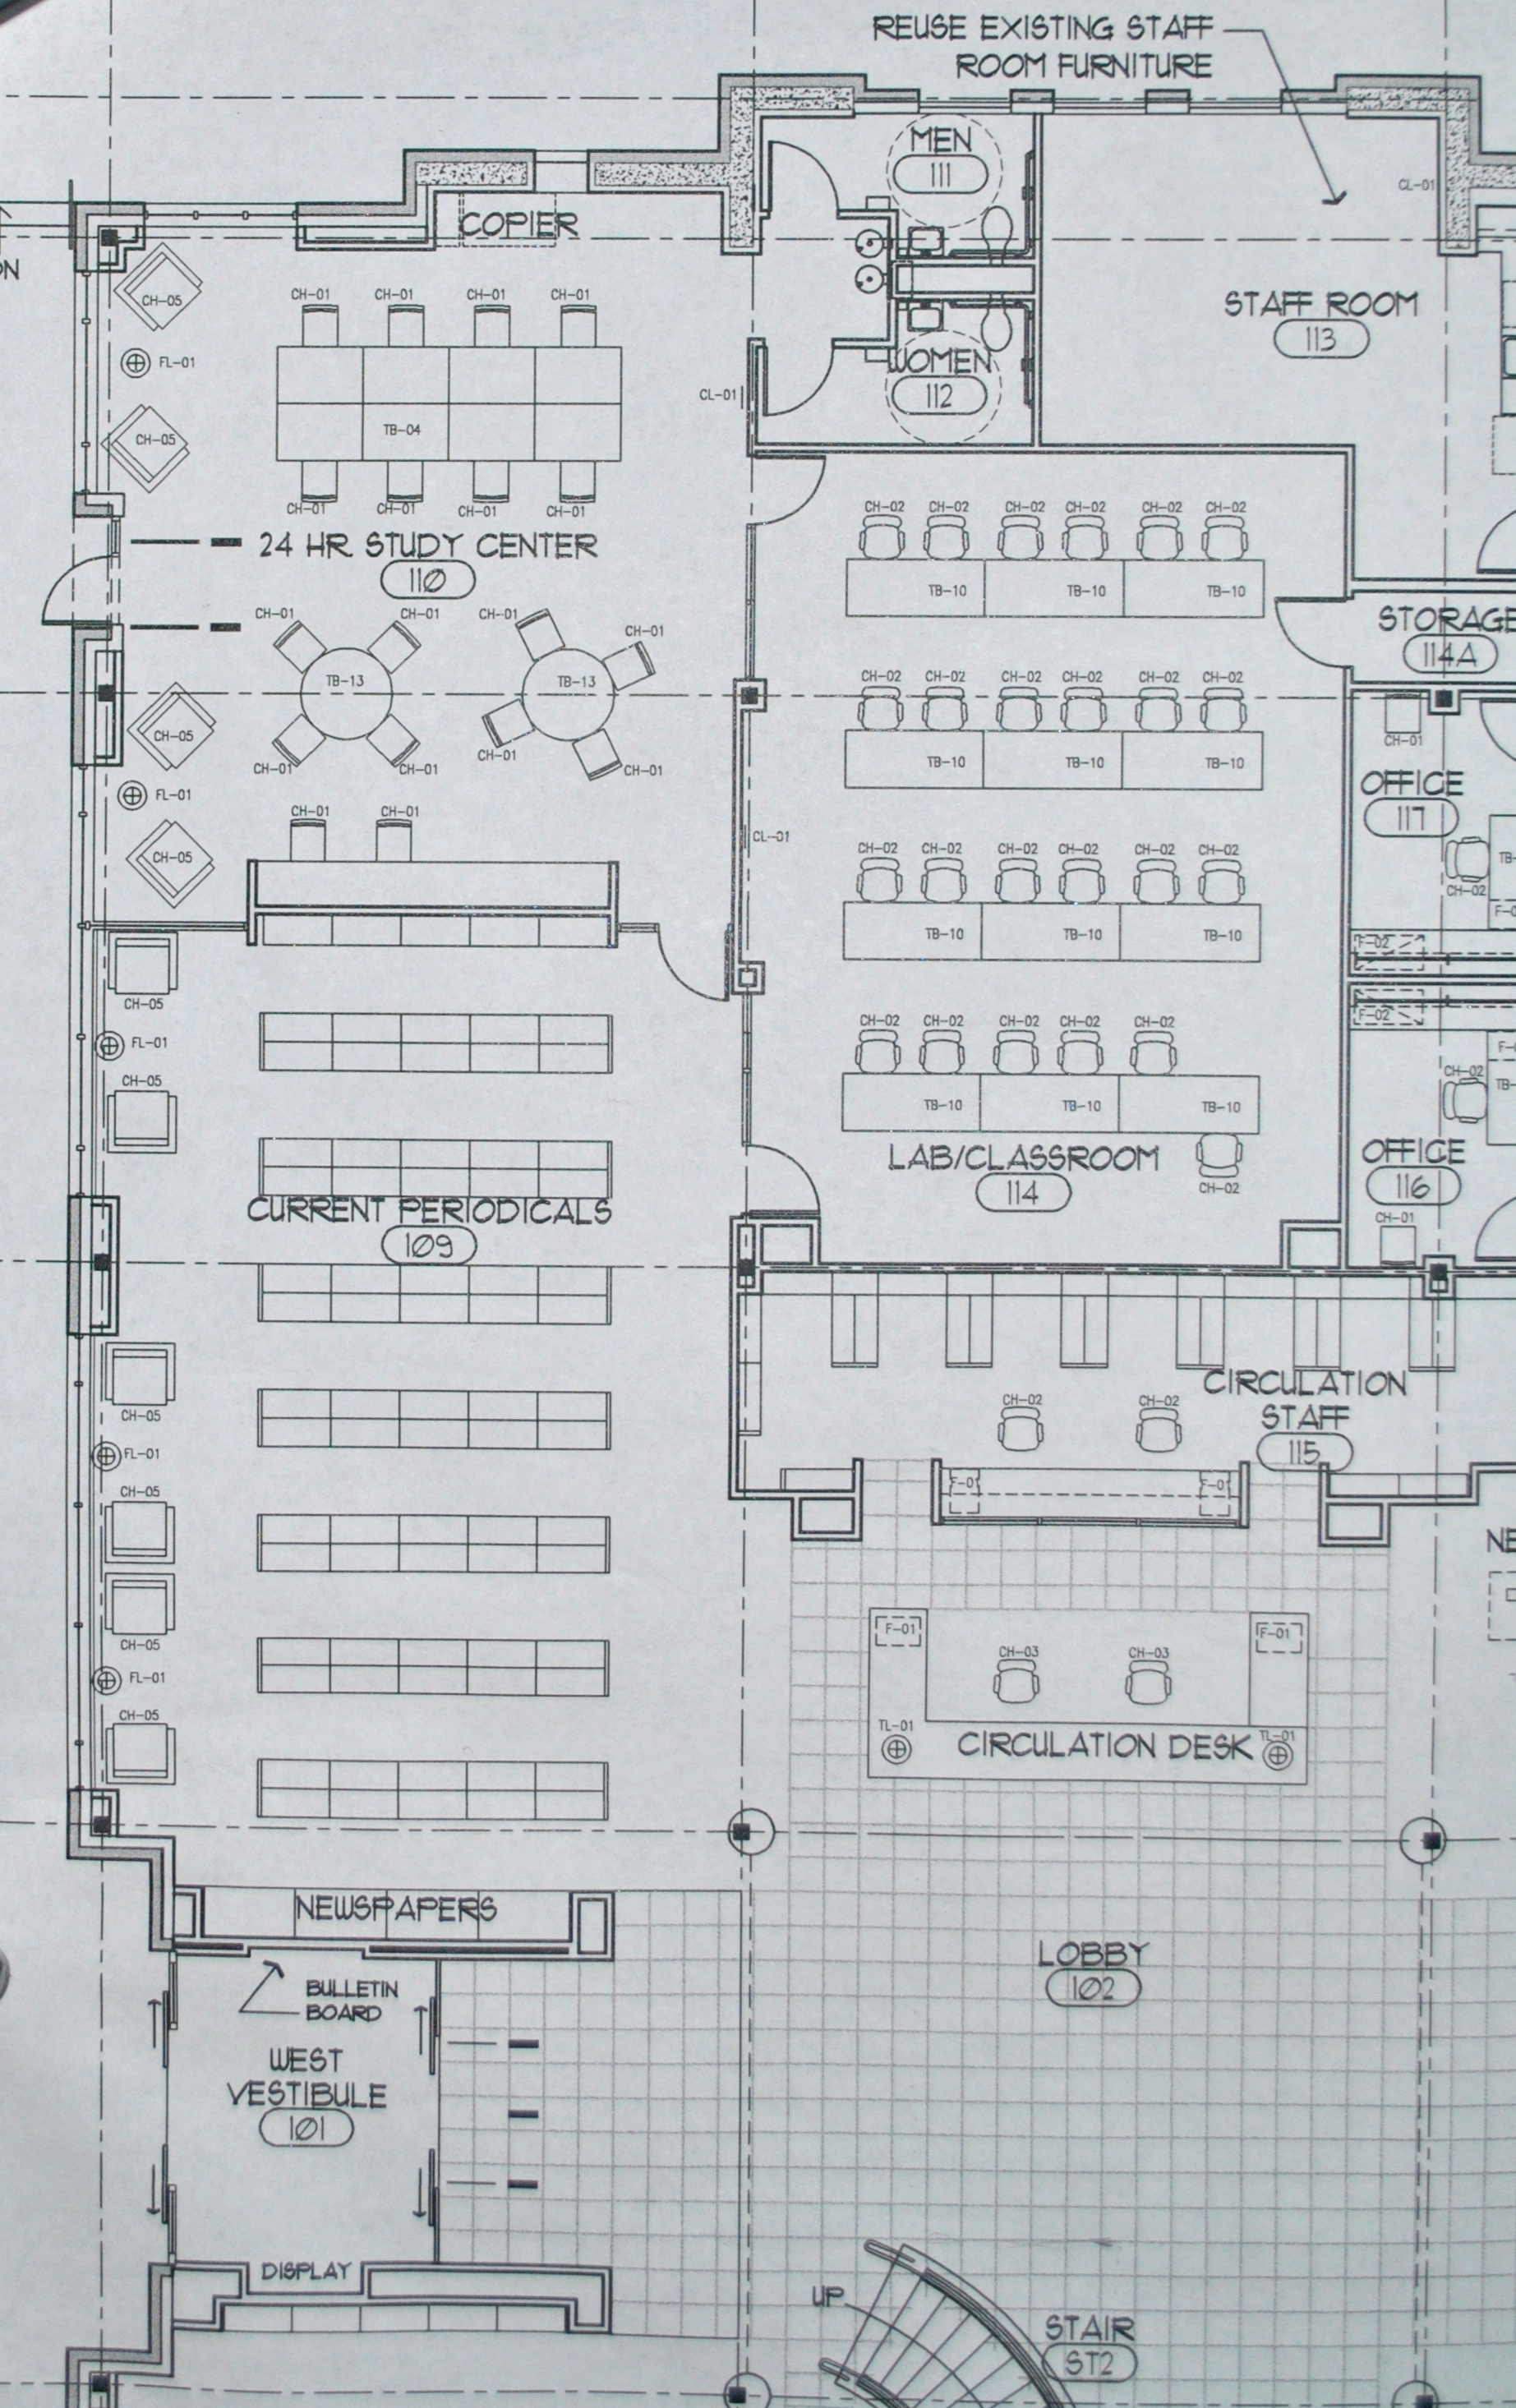 Blueprints show a mixture of classroom space and places for literature.